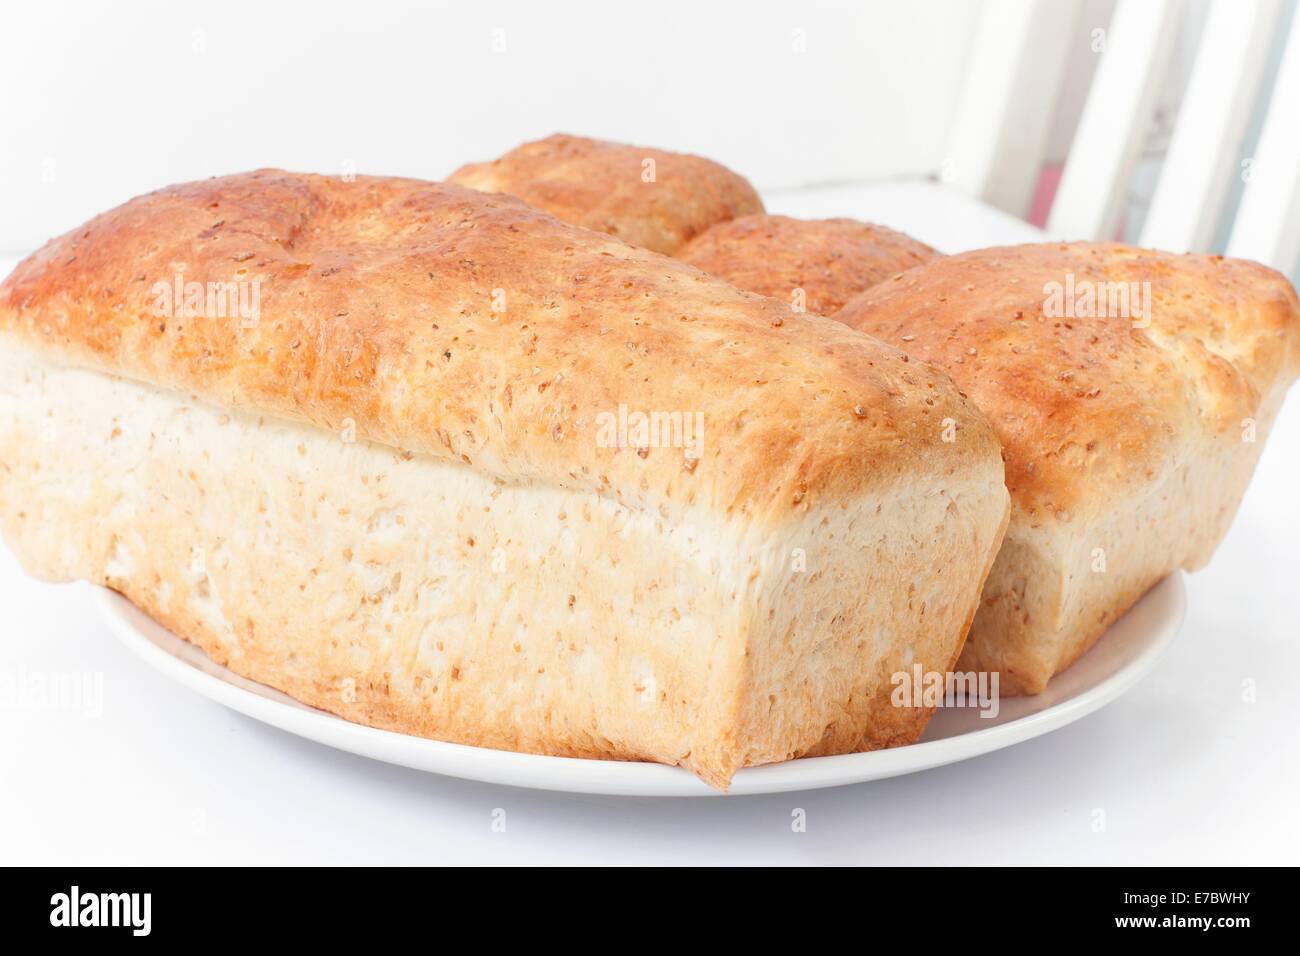 bakery, bread, breakfast, brown, carbohydrate, cereal, close-up, color, crunchy, crust, diet, Stock Photo